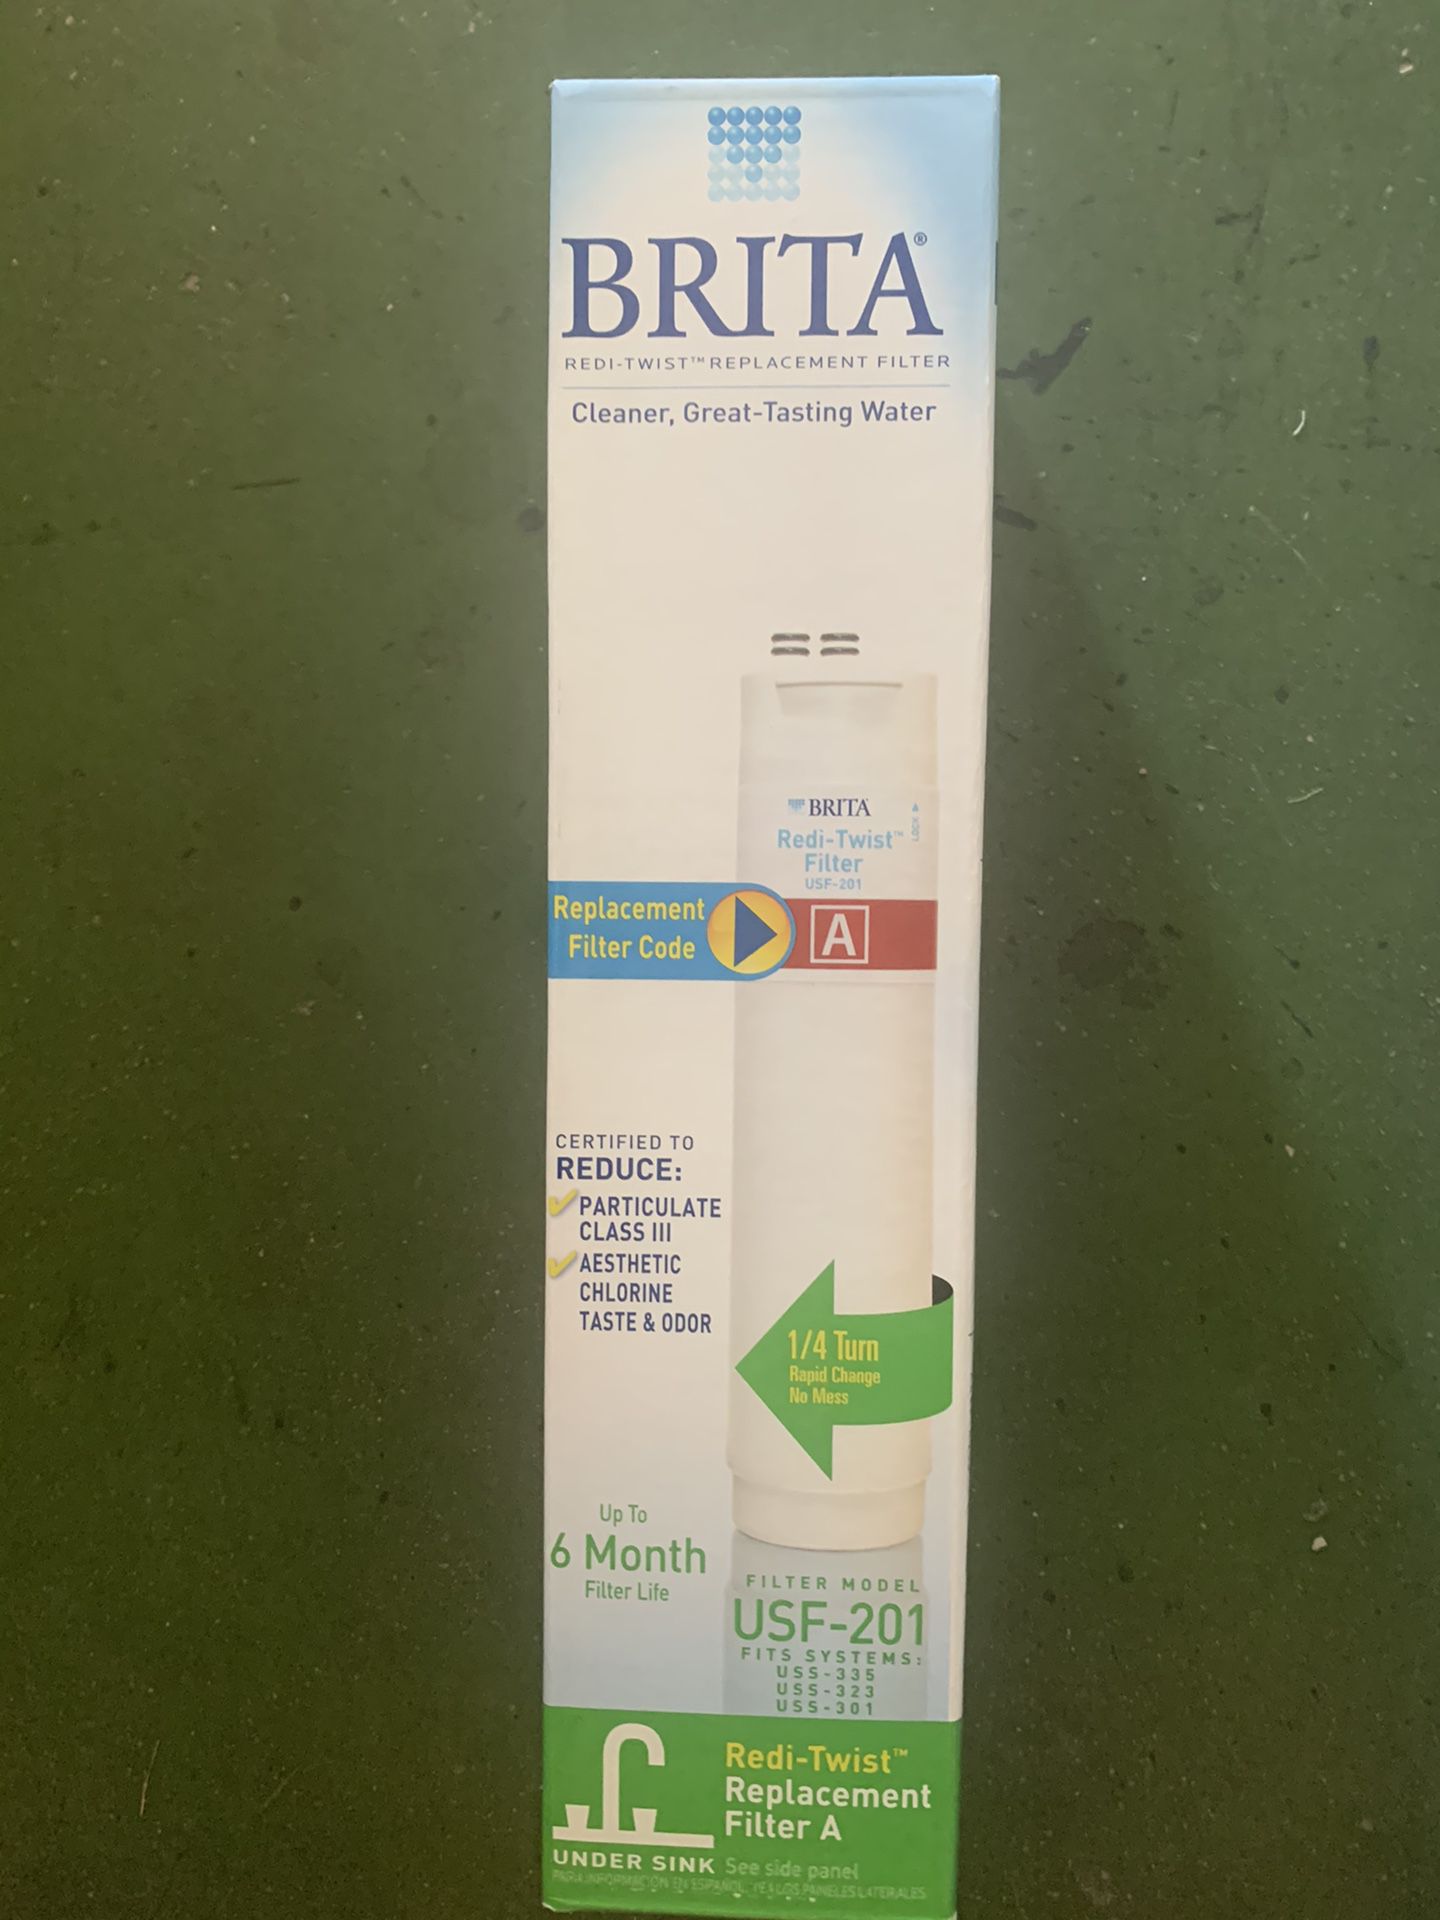 Replacement filter A for brita brand